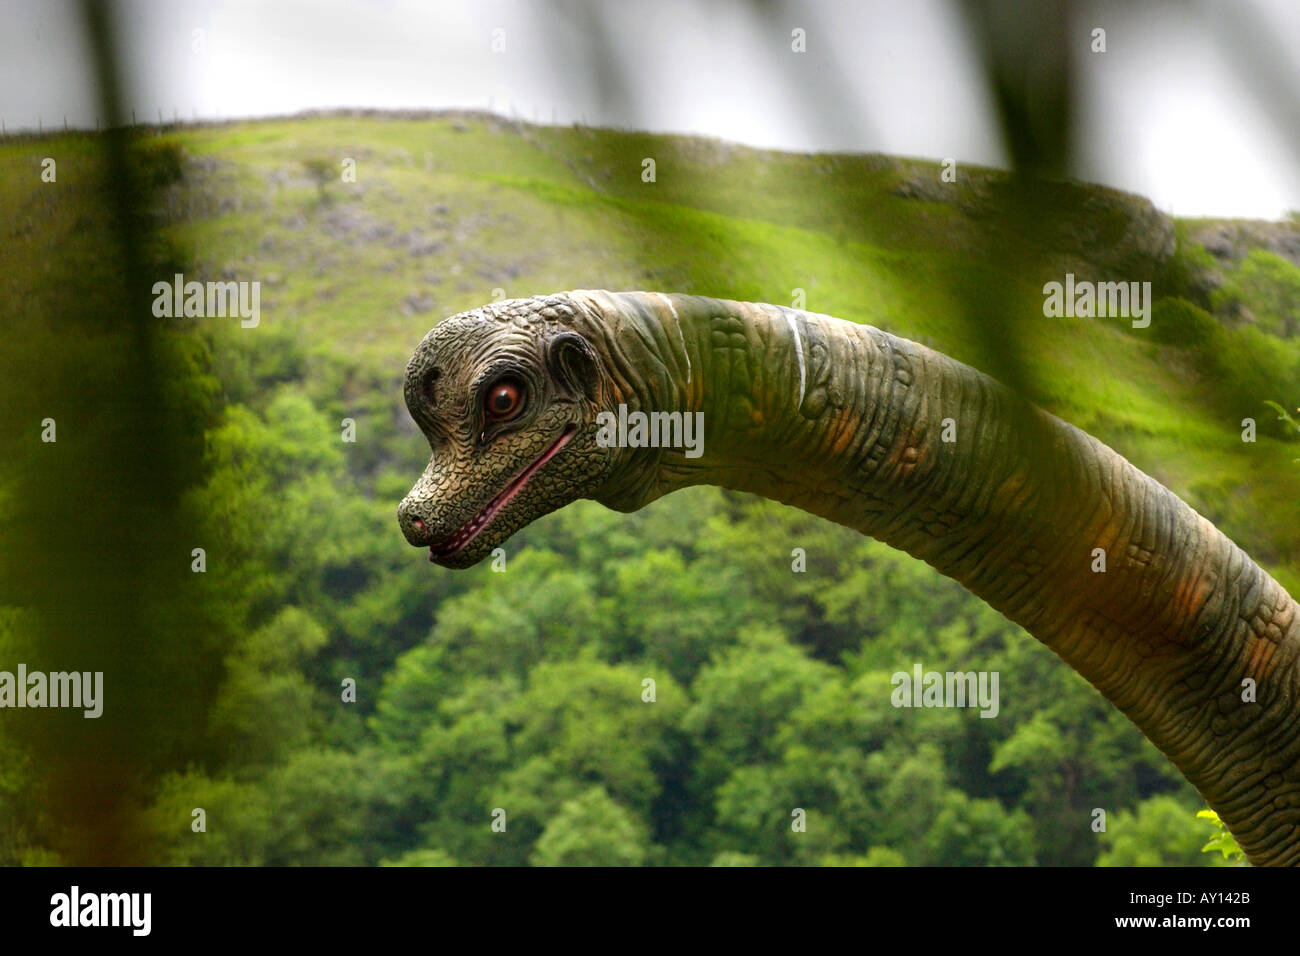 Brachiosaur in the Worlds biggest dinosaur park at the Dan yr Ogof Showcaves in the Brecon Beacons National Park Powys Wales UK Stock Photo